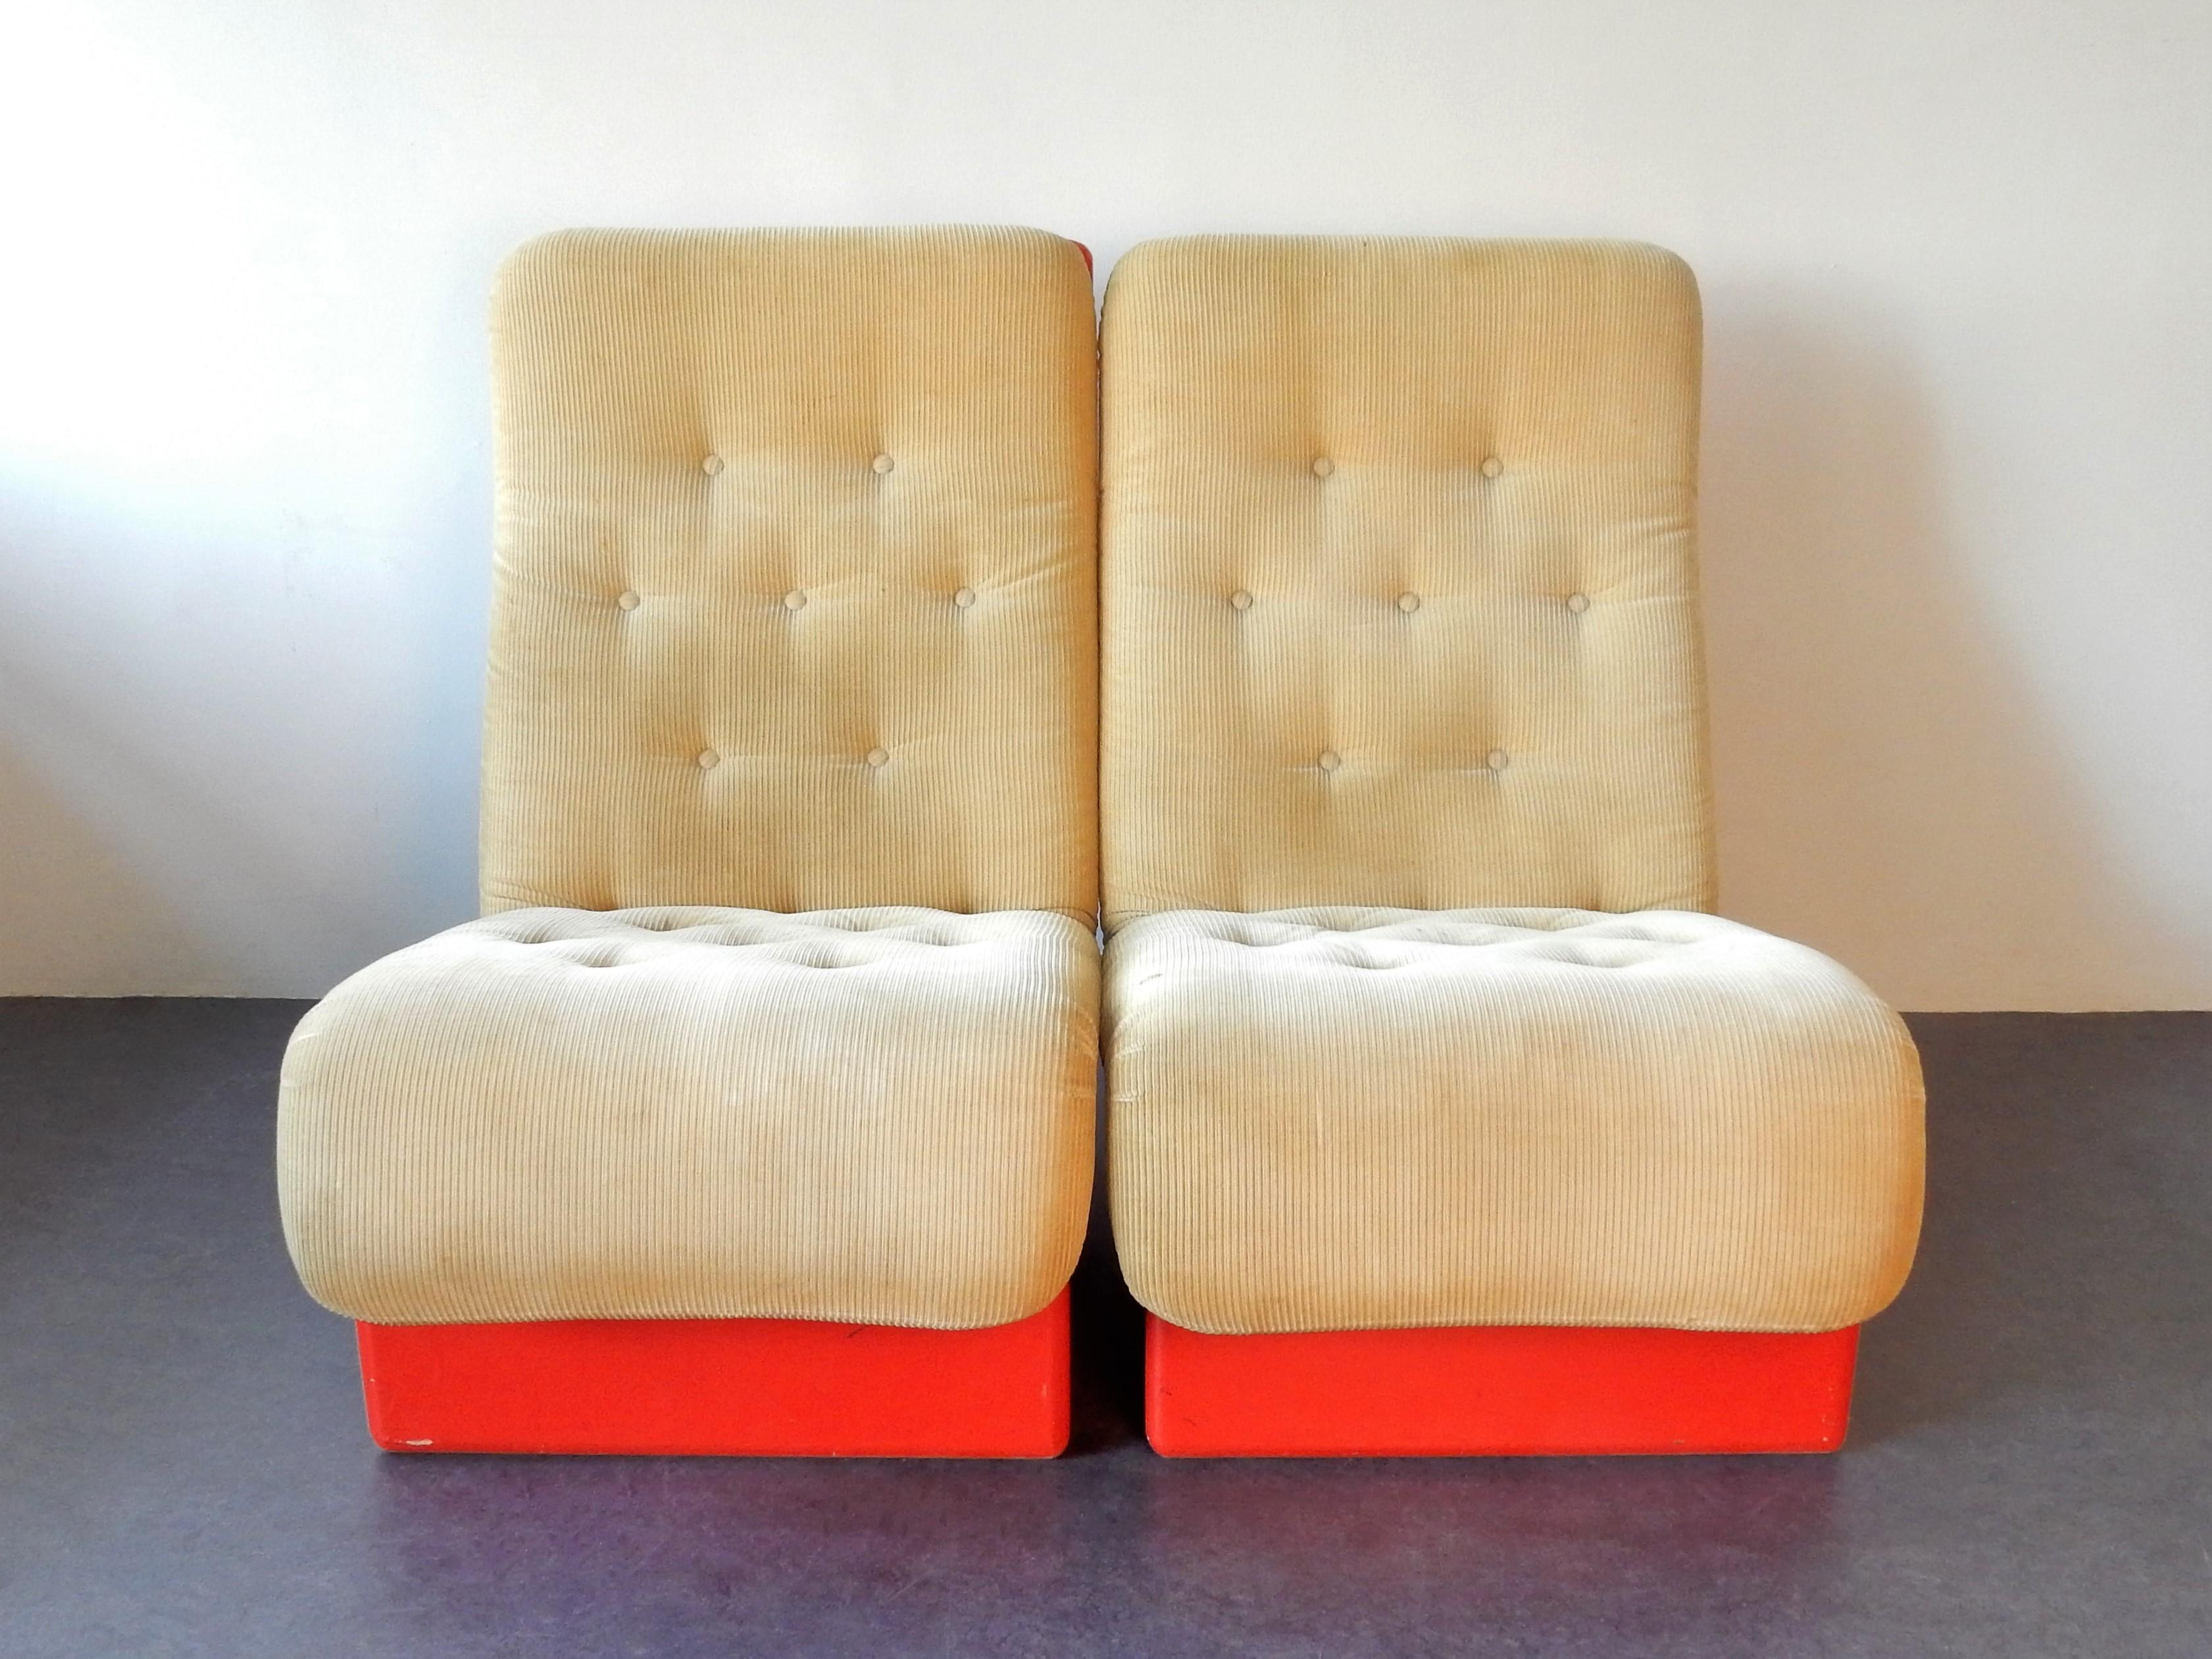 This is a very nice and rare set of 2 lounge chairs made by the Danish manufacturer Cado in the 1960s. The chairs are made of a red lacquered moulded synthetic material with a moulded foam cushion on top that is covered with its original beige